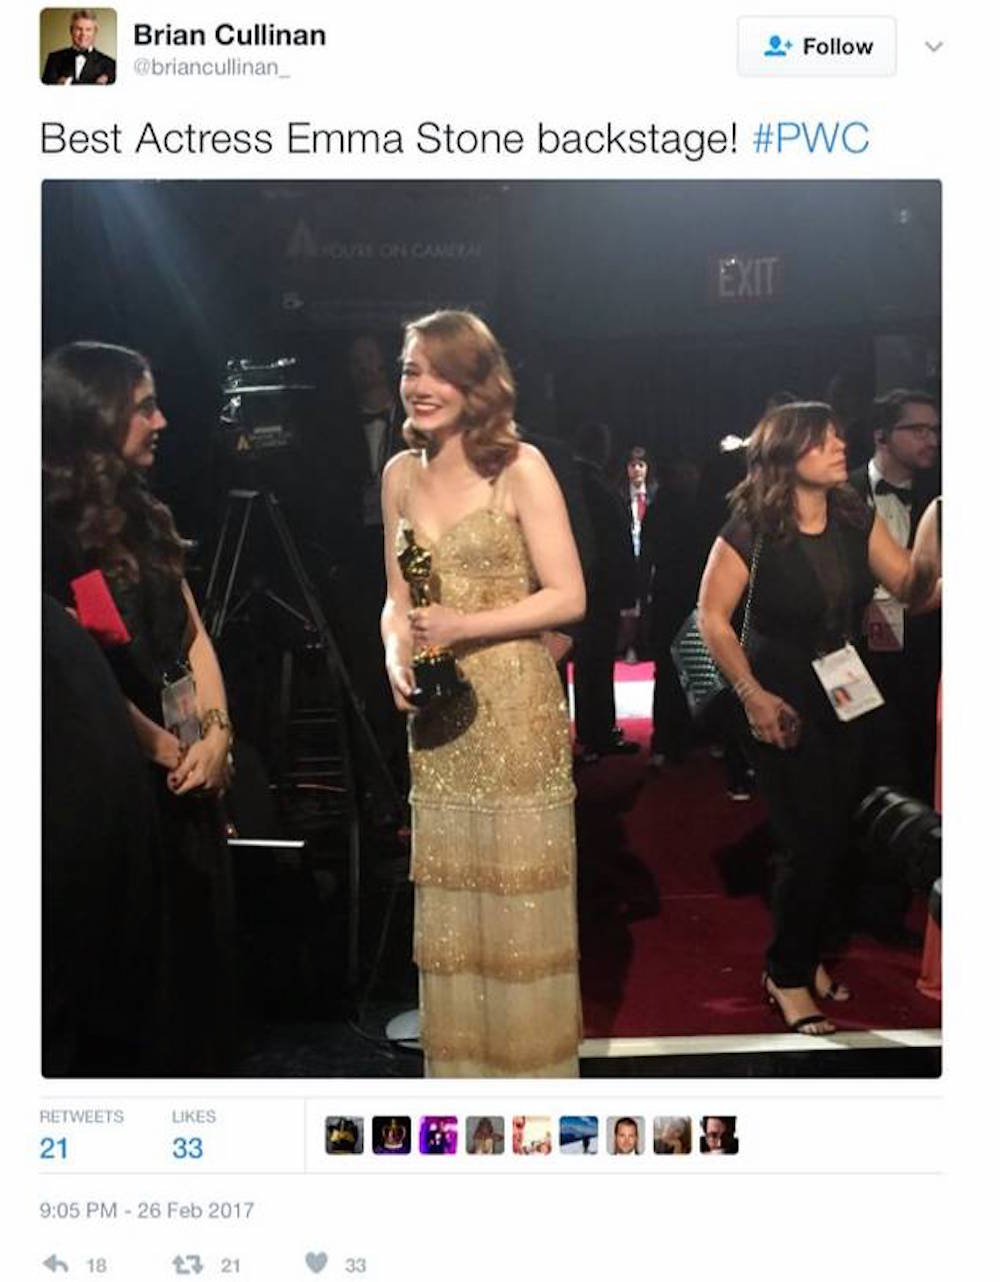 PWC Accountant Tweeted Backstage Photo of Emma Stone Three Minutes Before Fucking Up the Oscars